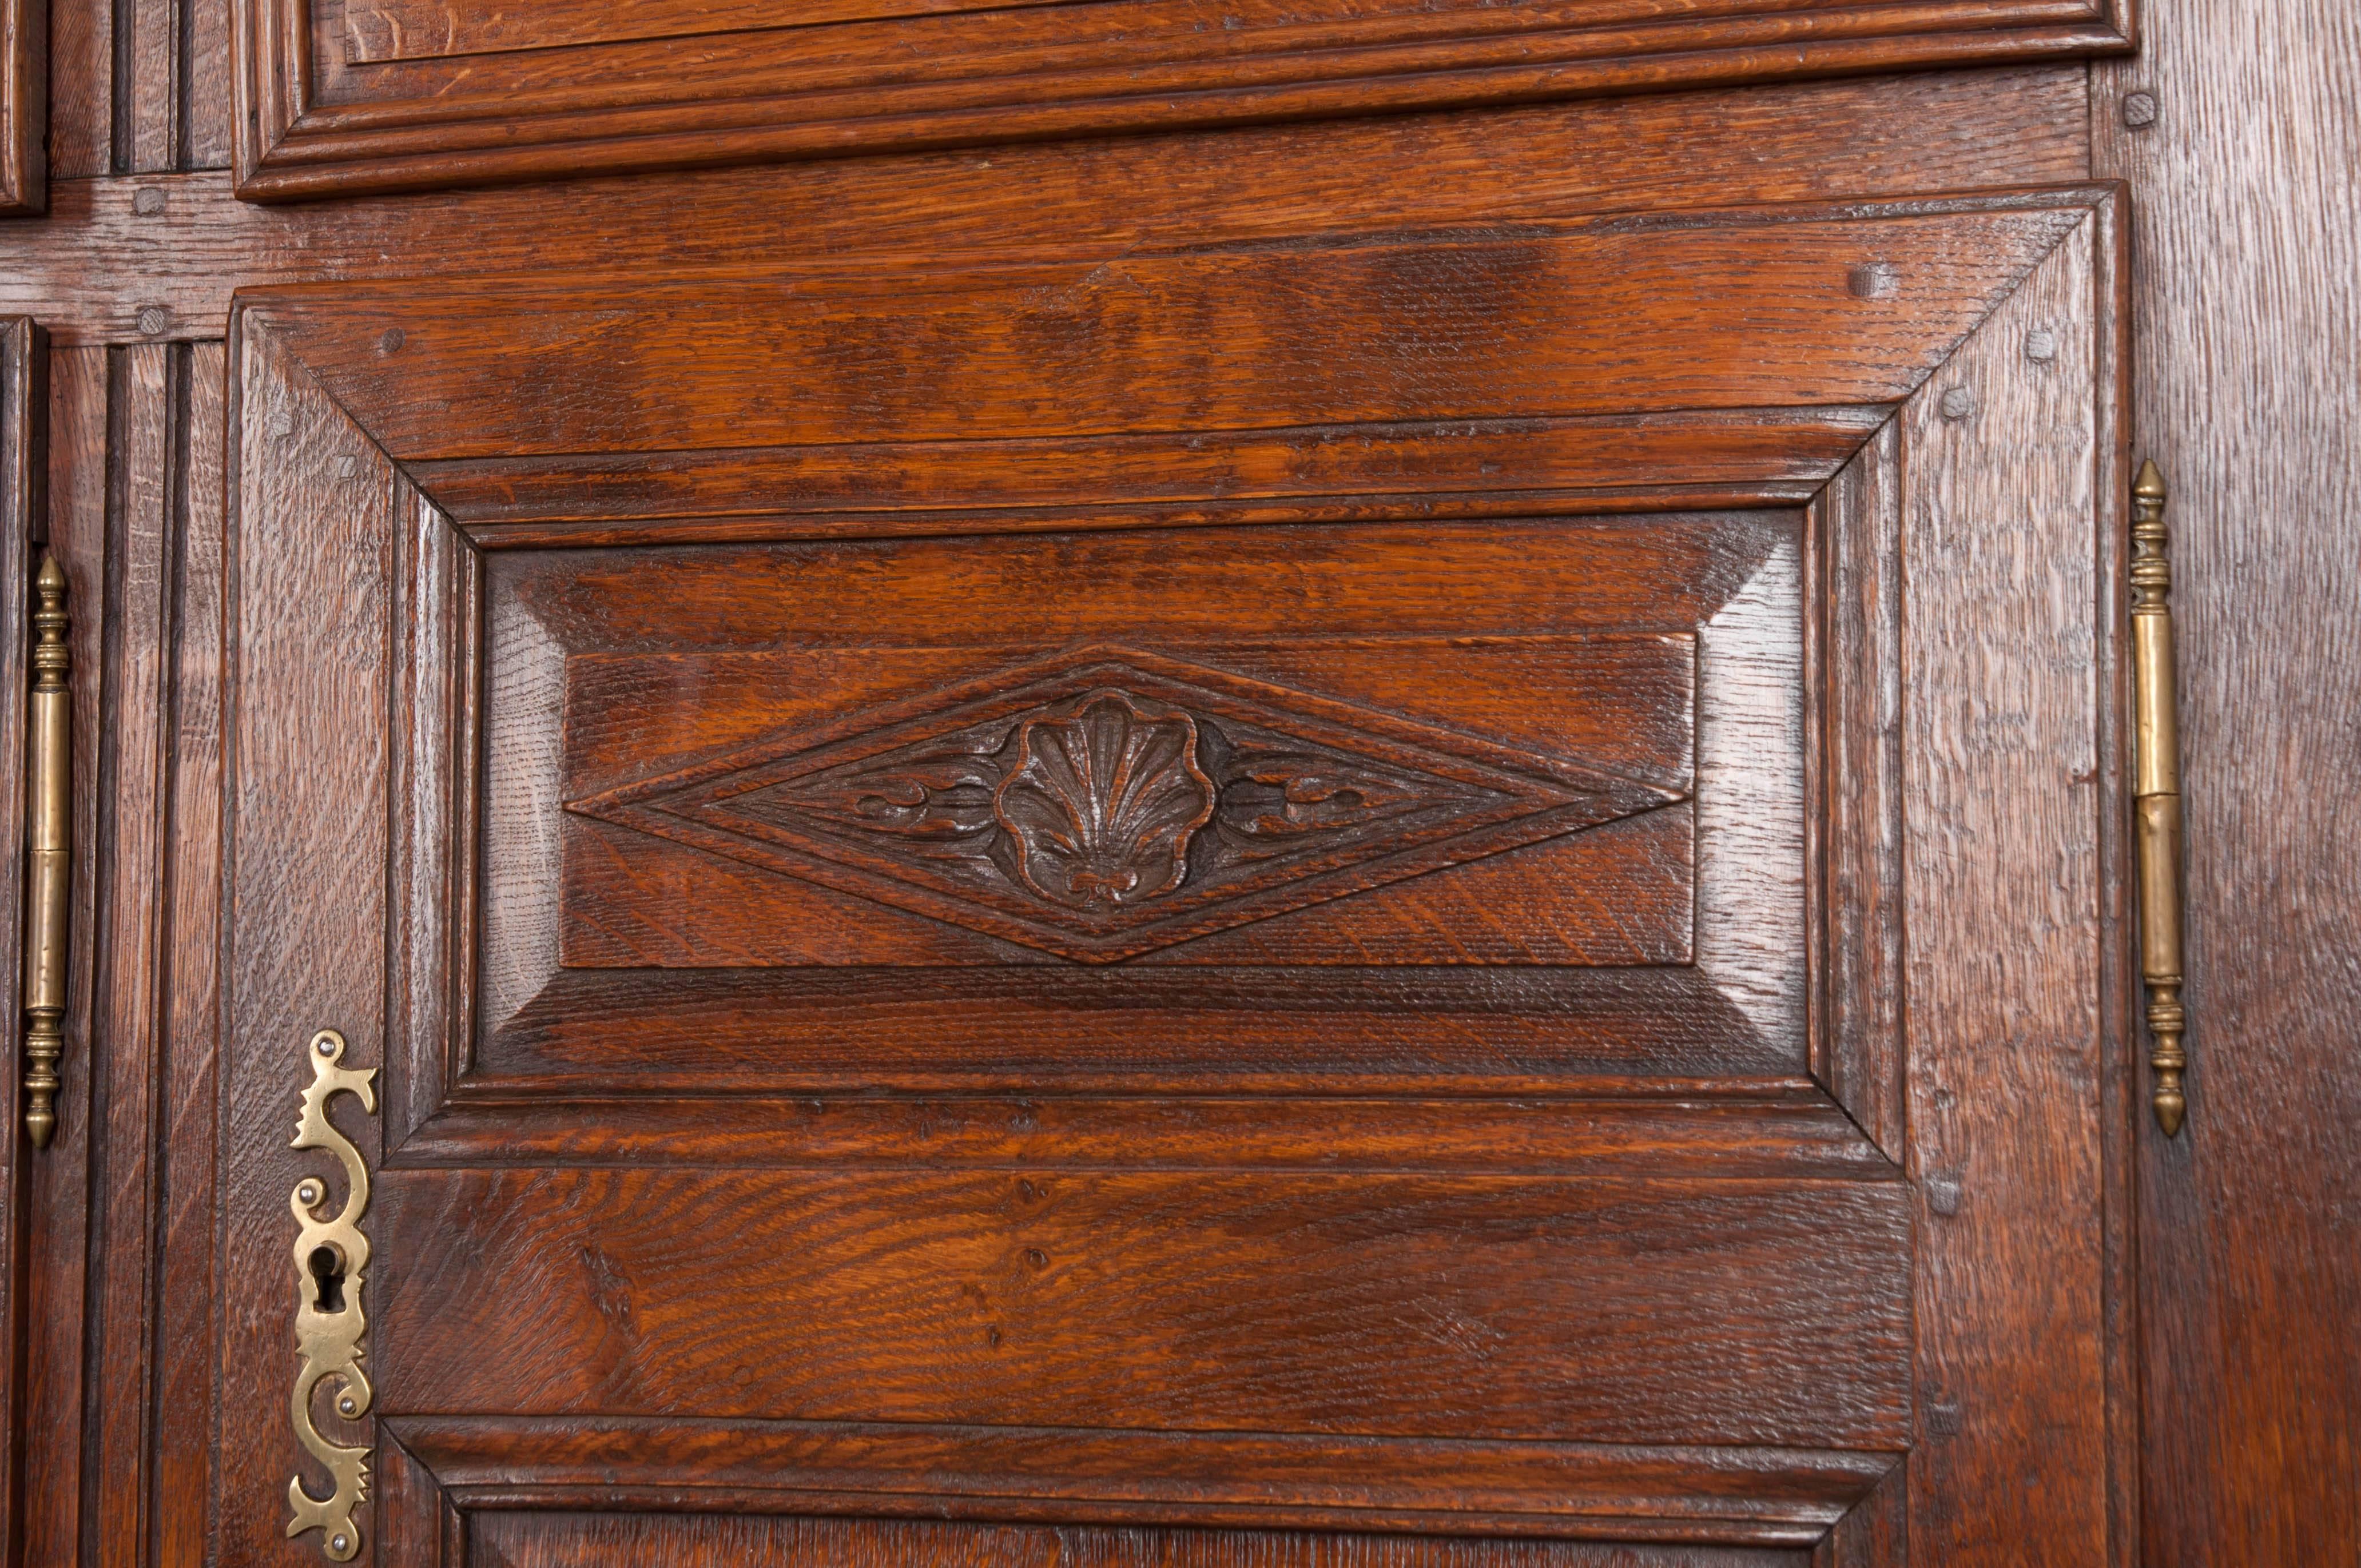 A large, French oak enfilade, made in Normandy towards the end of the 19th century. This tall piece has been made in the Provincial style. The antique contains three drawers that are set above three doors. The centre drawer is lockable, and all